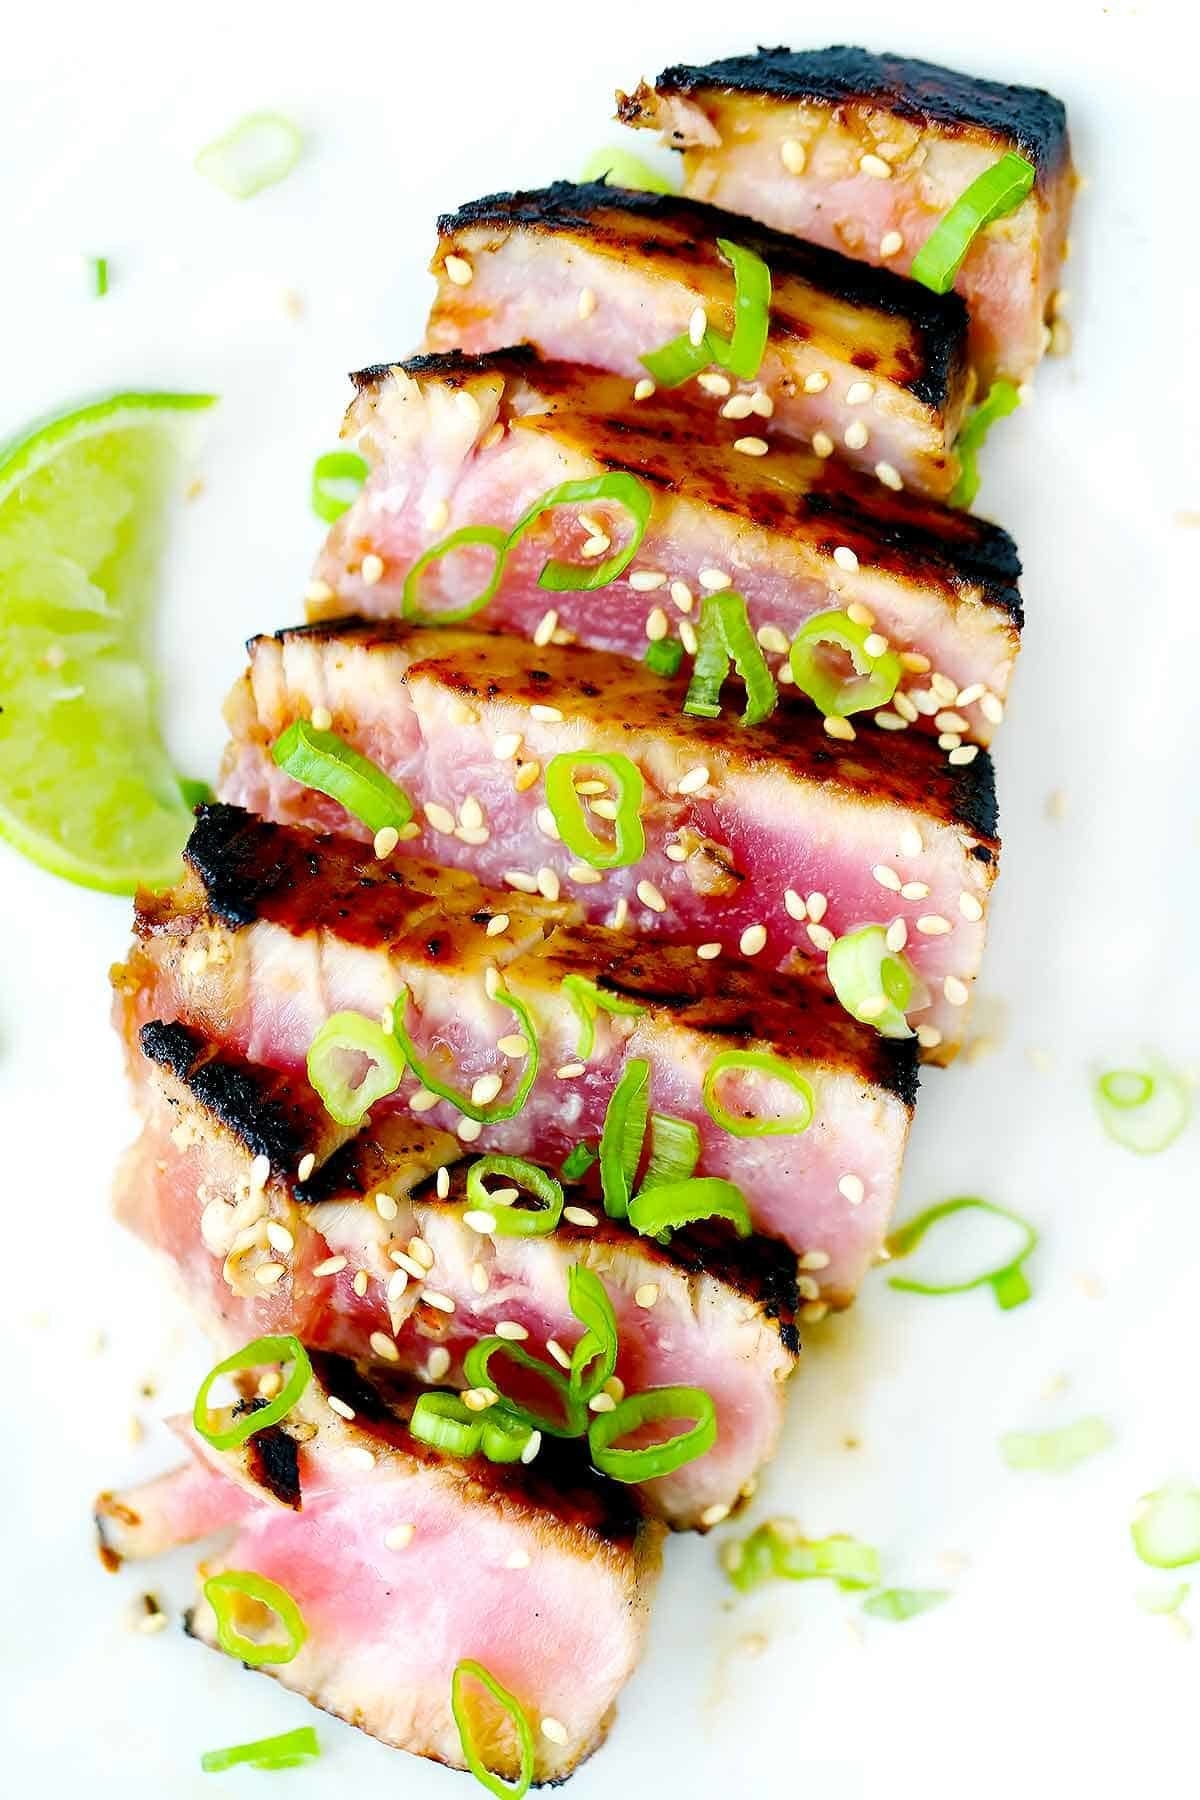 An ahi tuna steak, seared and rare on the inside, sliced into strips and topped with scallions and sesame seeds.